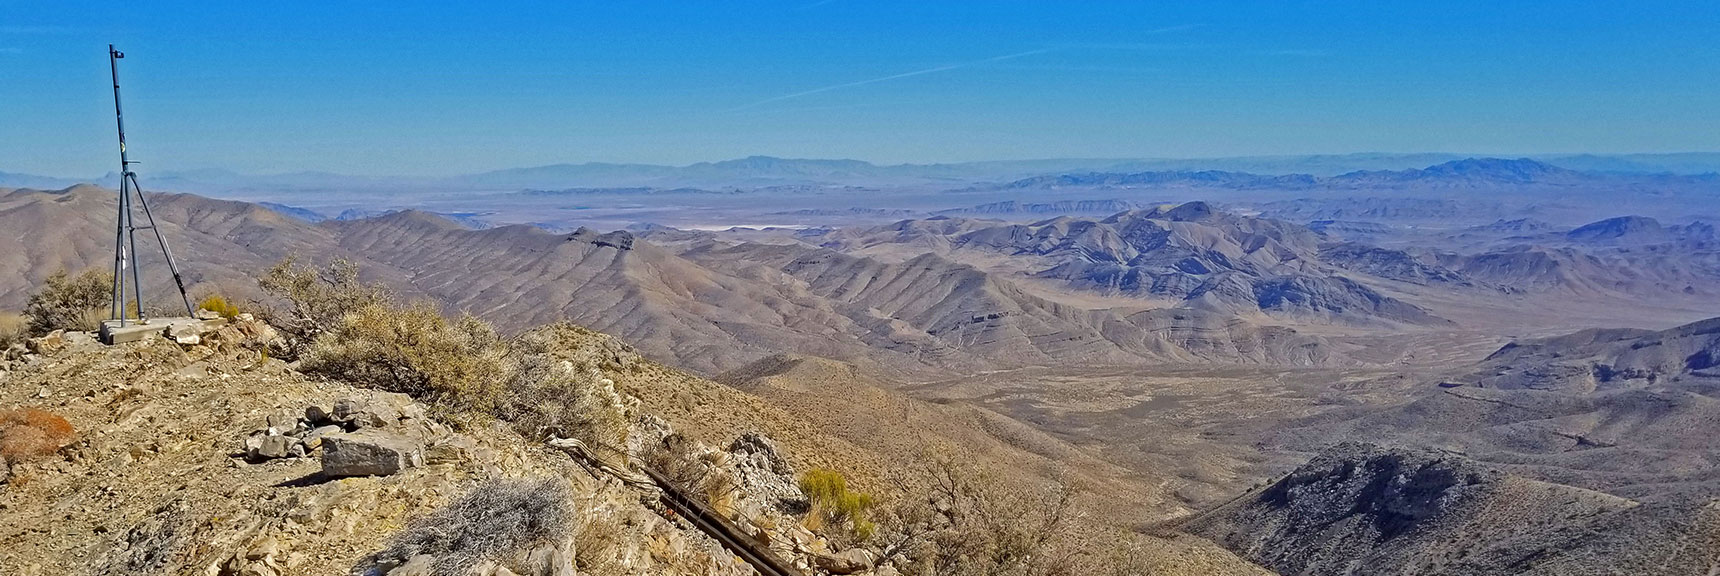 View Southeast of Gass Peak Summit Toward Muddy Mountains and Valley of Fire Area. | Gass Peak Grand Crossing | Desert National Wildlife Refuge to Centennial Hills Las Vegas via Gass Peak Summit by Foot